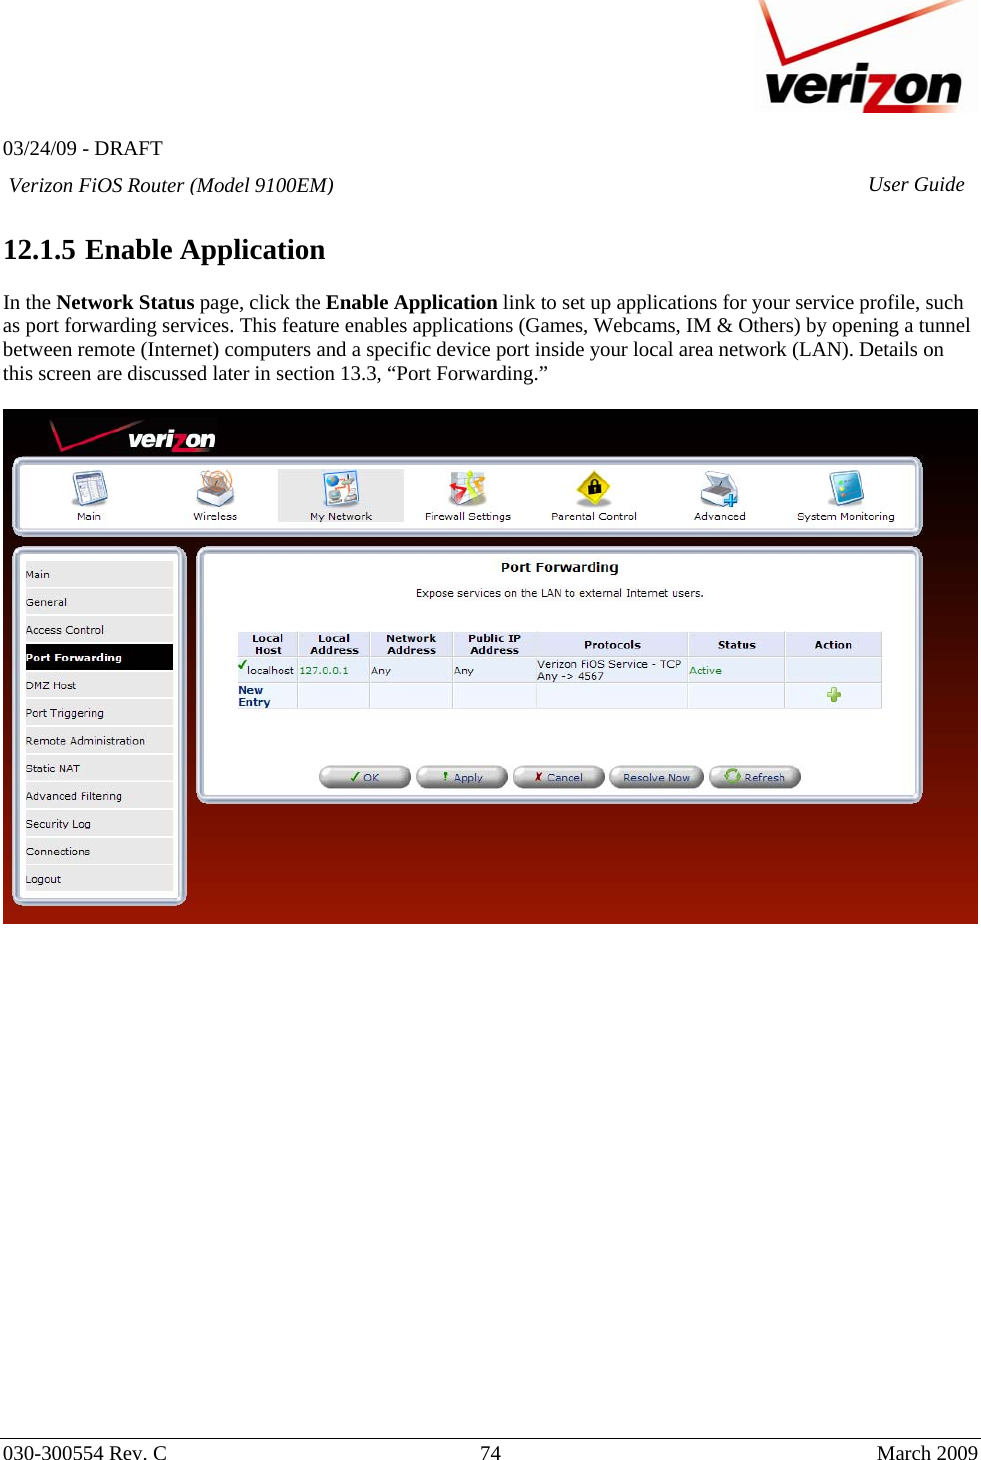   03/24/09 - DRAFT   030-300554 Rev. C  74      March 2009  Verizon FiOS Router (Model 9100EM) User Guide 12.1.5  Enable Application  In the Network Status page, click the Enable Application link to set up applications for your service profile, such as port forwarding services. This feature enables applications (Games, Webcams, IM &amp; Others) by opening a tunnel between remote (Internet) computers and a specific device port inside your local area network (LAN). Details on this screen are discussed later in section 13.3, “Port Forwarding.”                        